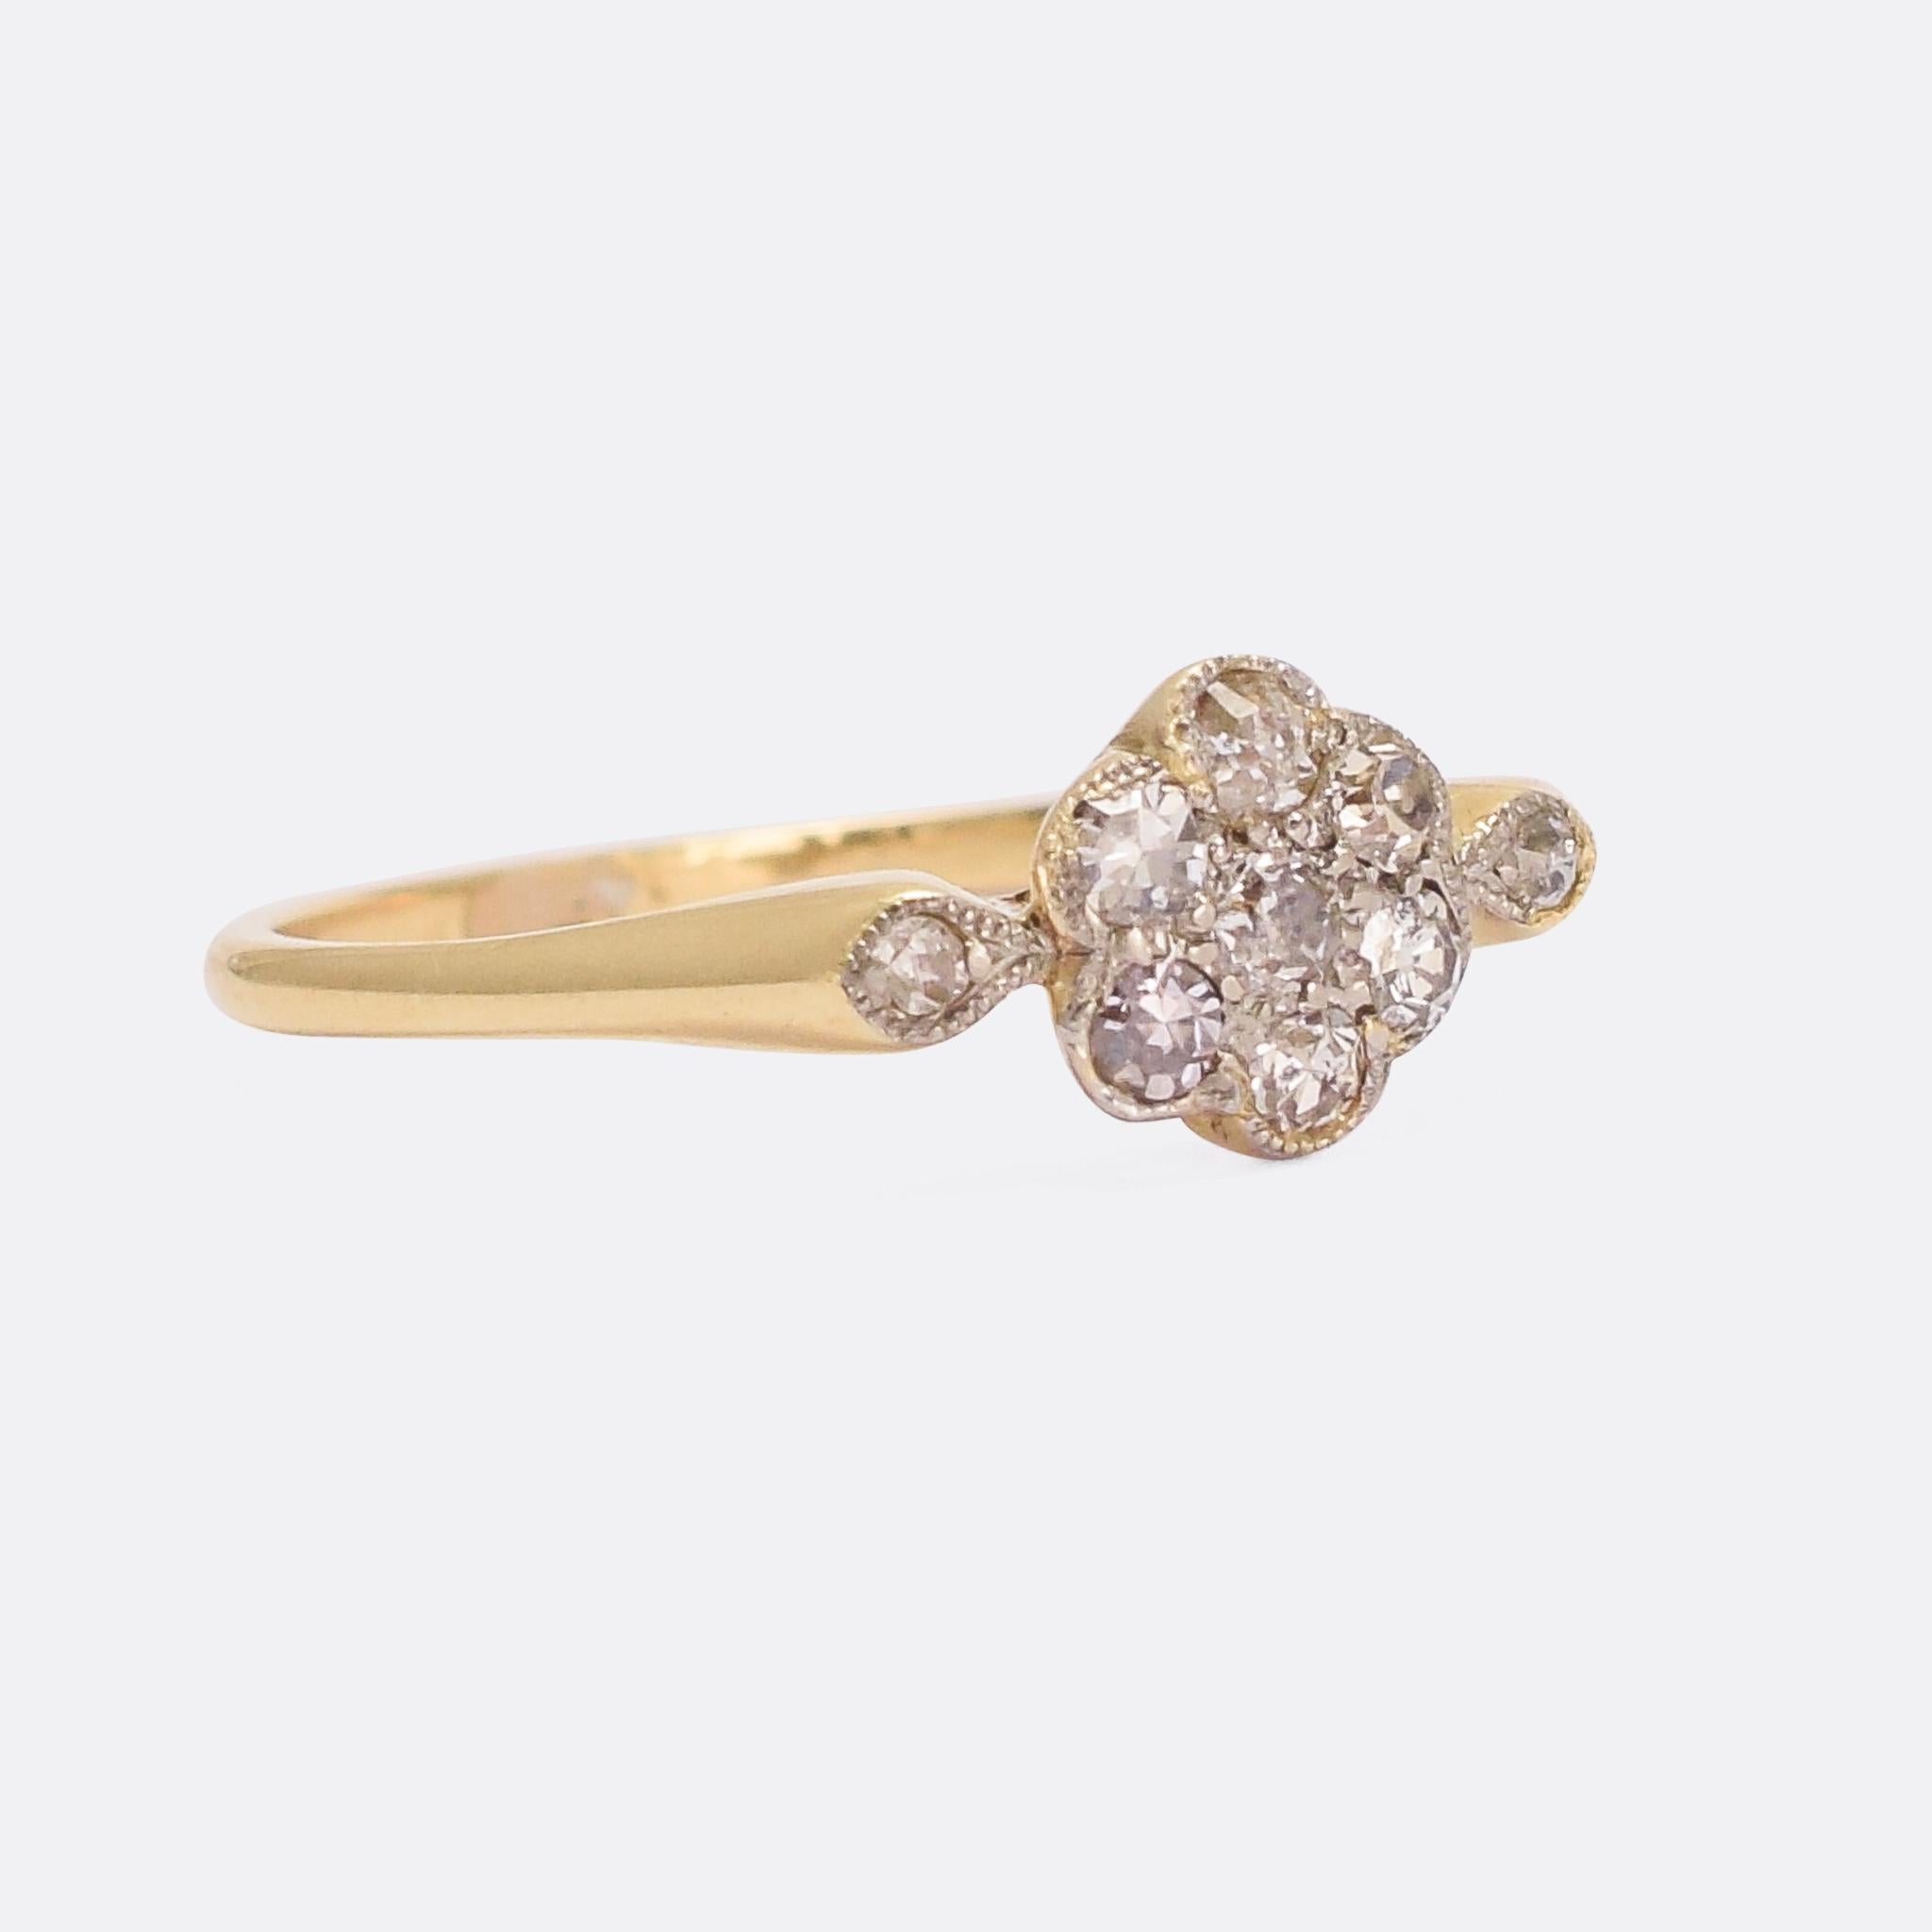 A lovely Edwardian diamond daisy ring modelled in 18 karat gold with millegrain platinum settings. It's set with eight-cut diamonds, seven to the head and a further two shoulder accents; the stones have big facets that produce bright flashes and